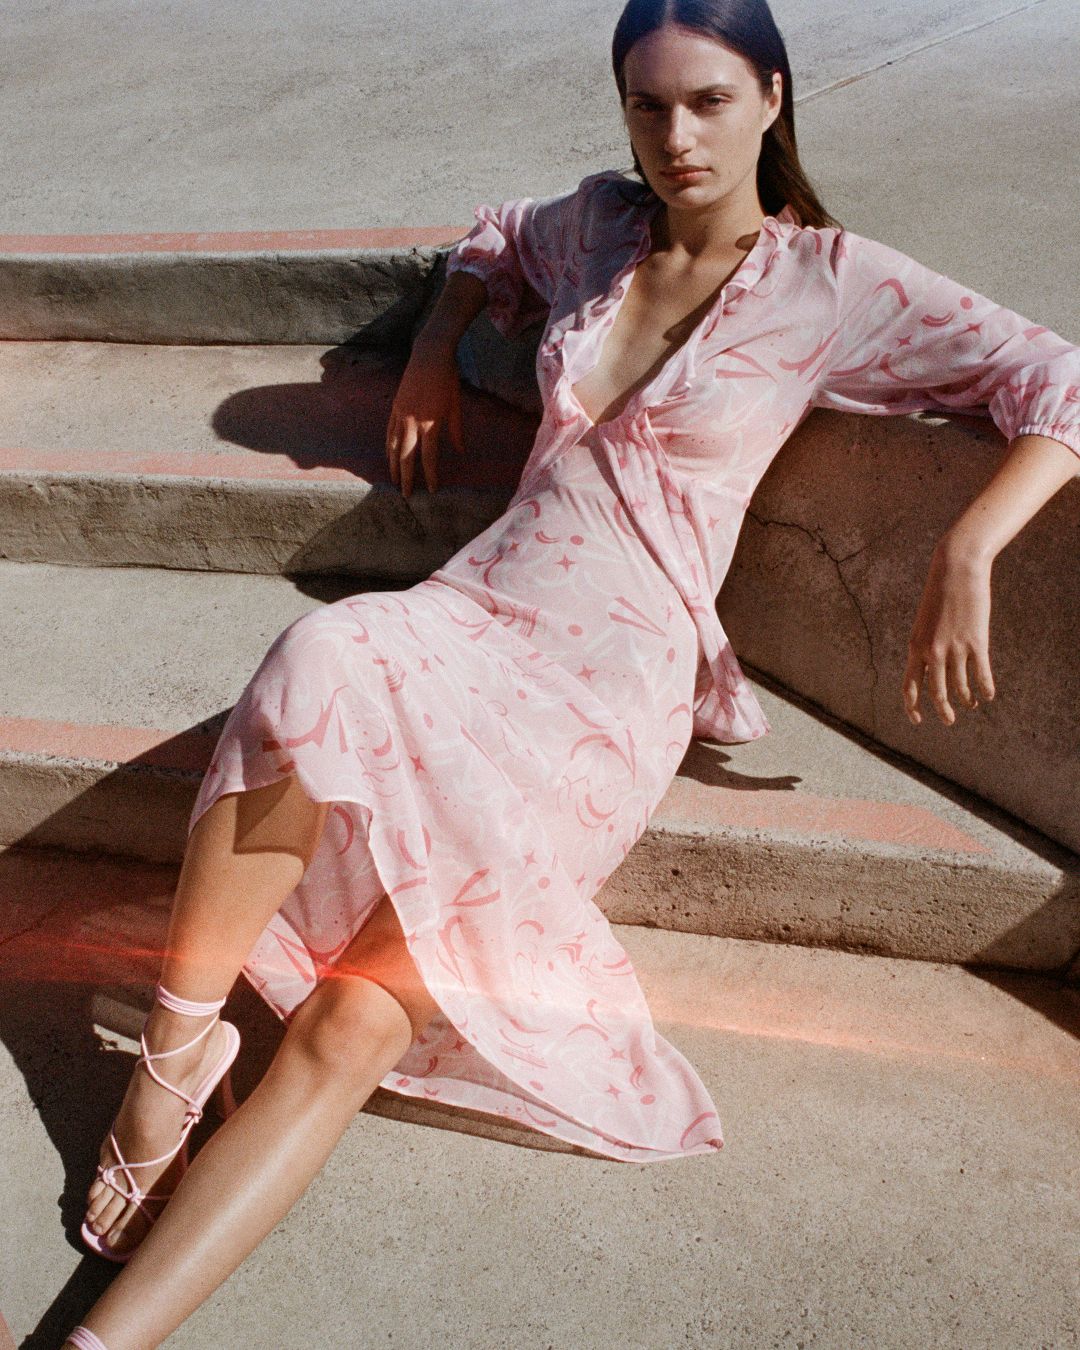 Girl laying on concrete stairs with pink painted lines with one knee bent in pink dress and shoes. 